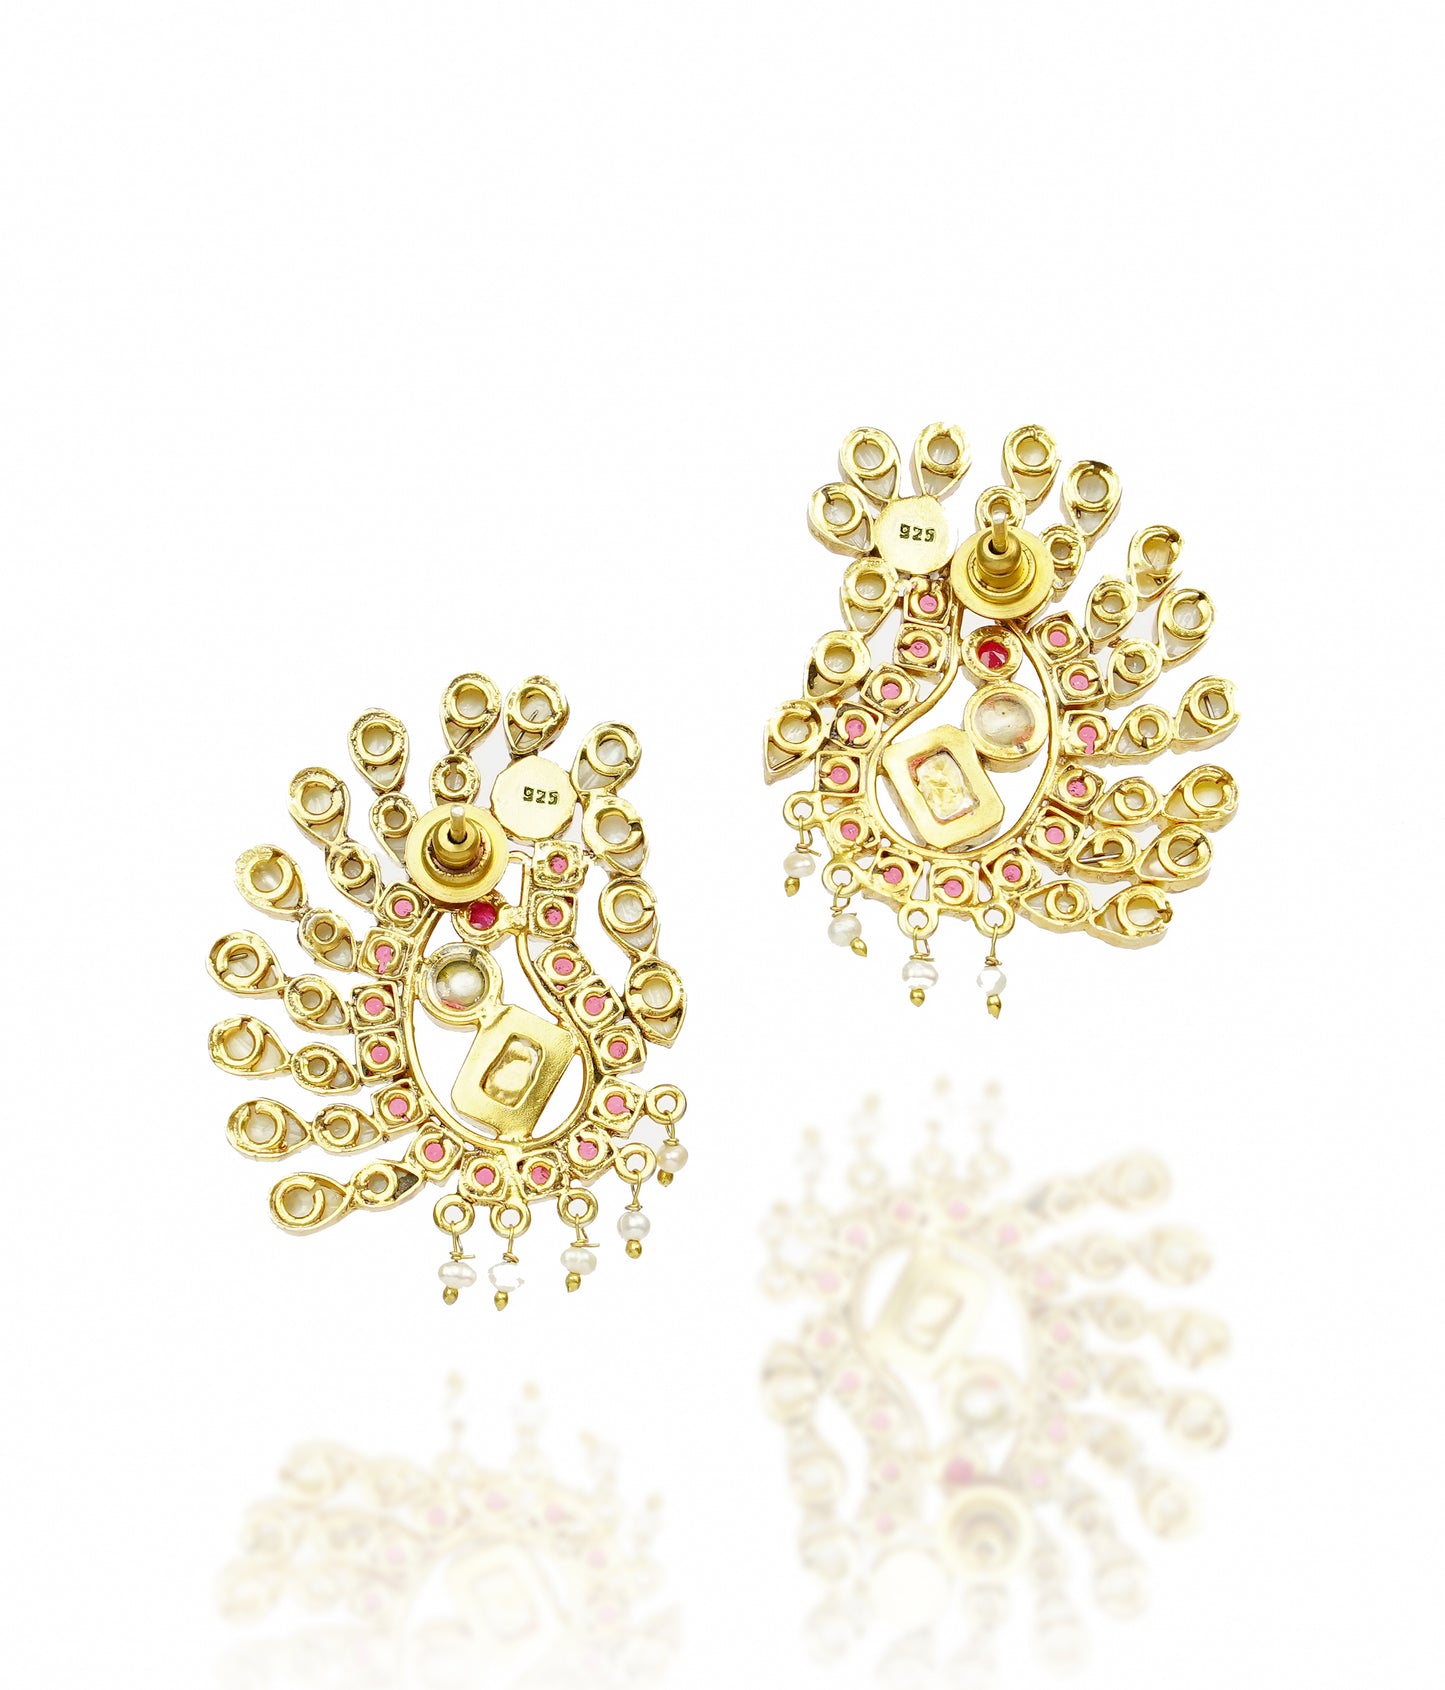 925 Silver Gold Plated Peacock Earrings with Checker Stones - Neeta Boochra Jewellery